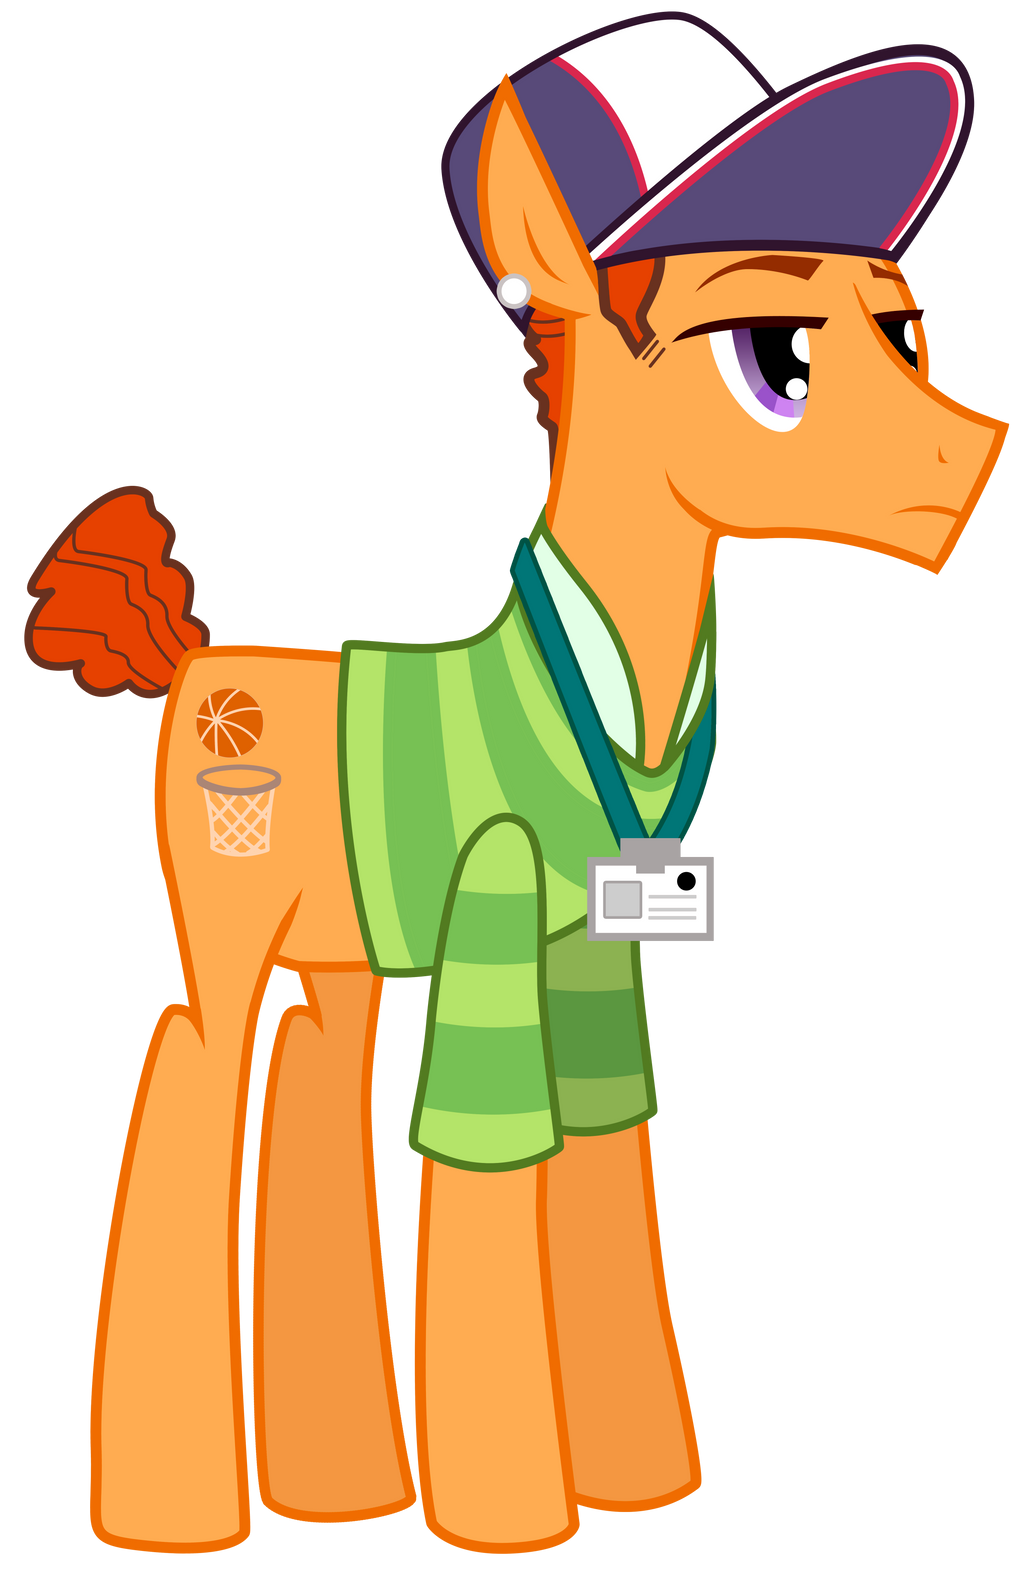 mlp_vector__the_fresh_prince_of_bel_air_